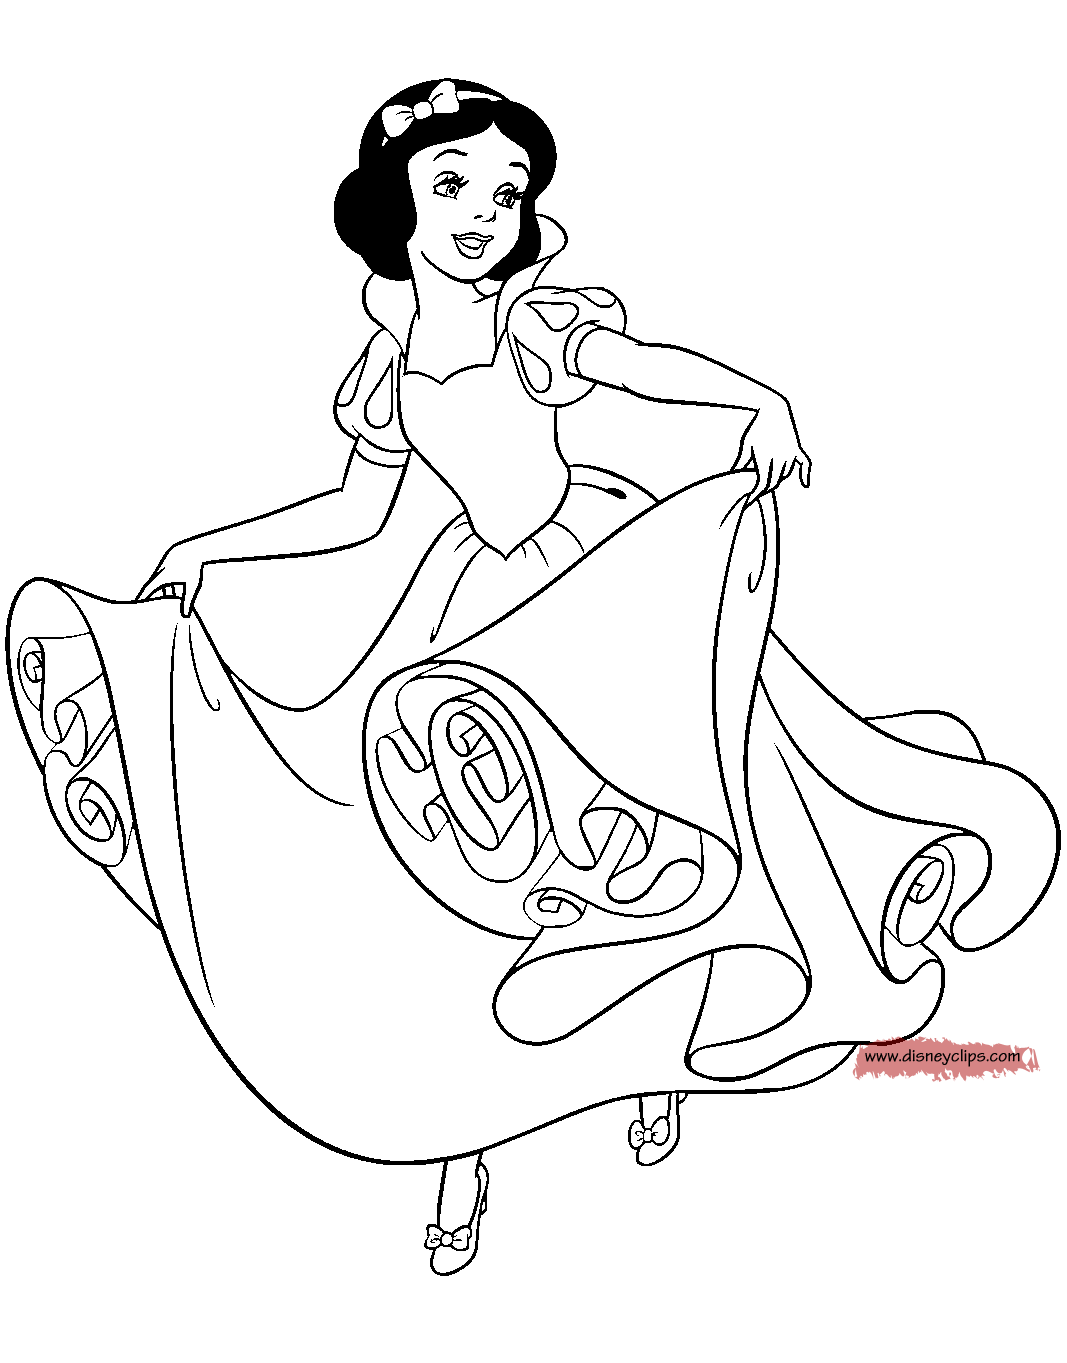 Snow White and the Seven Dwarfs Coloring Pages (2 ...